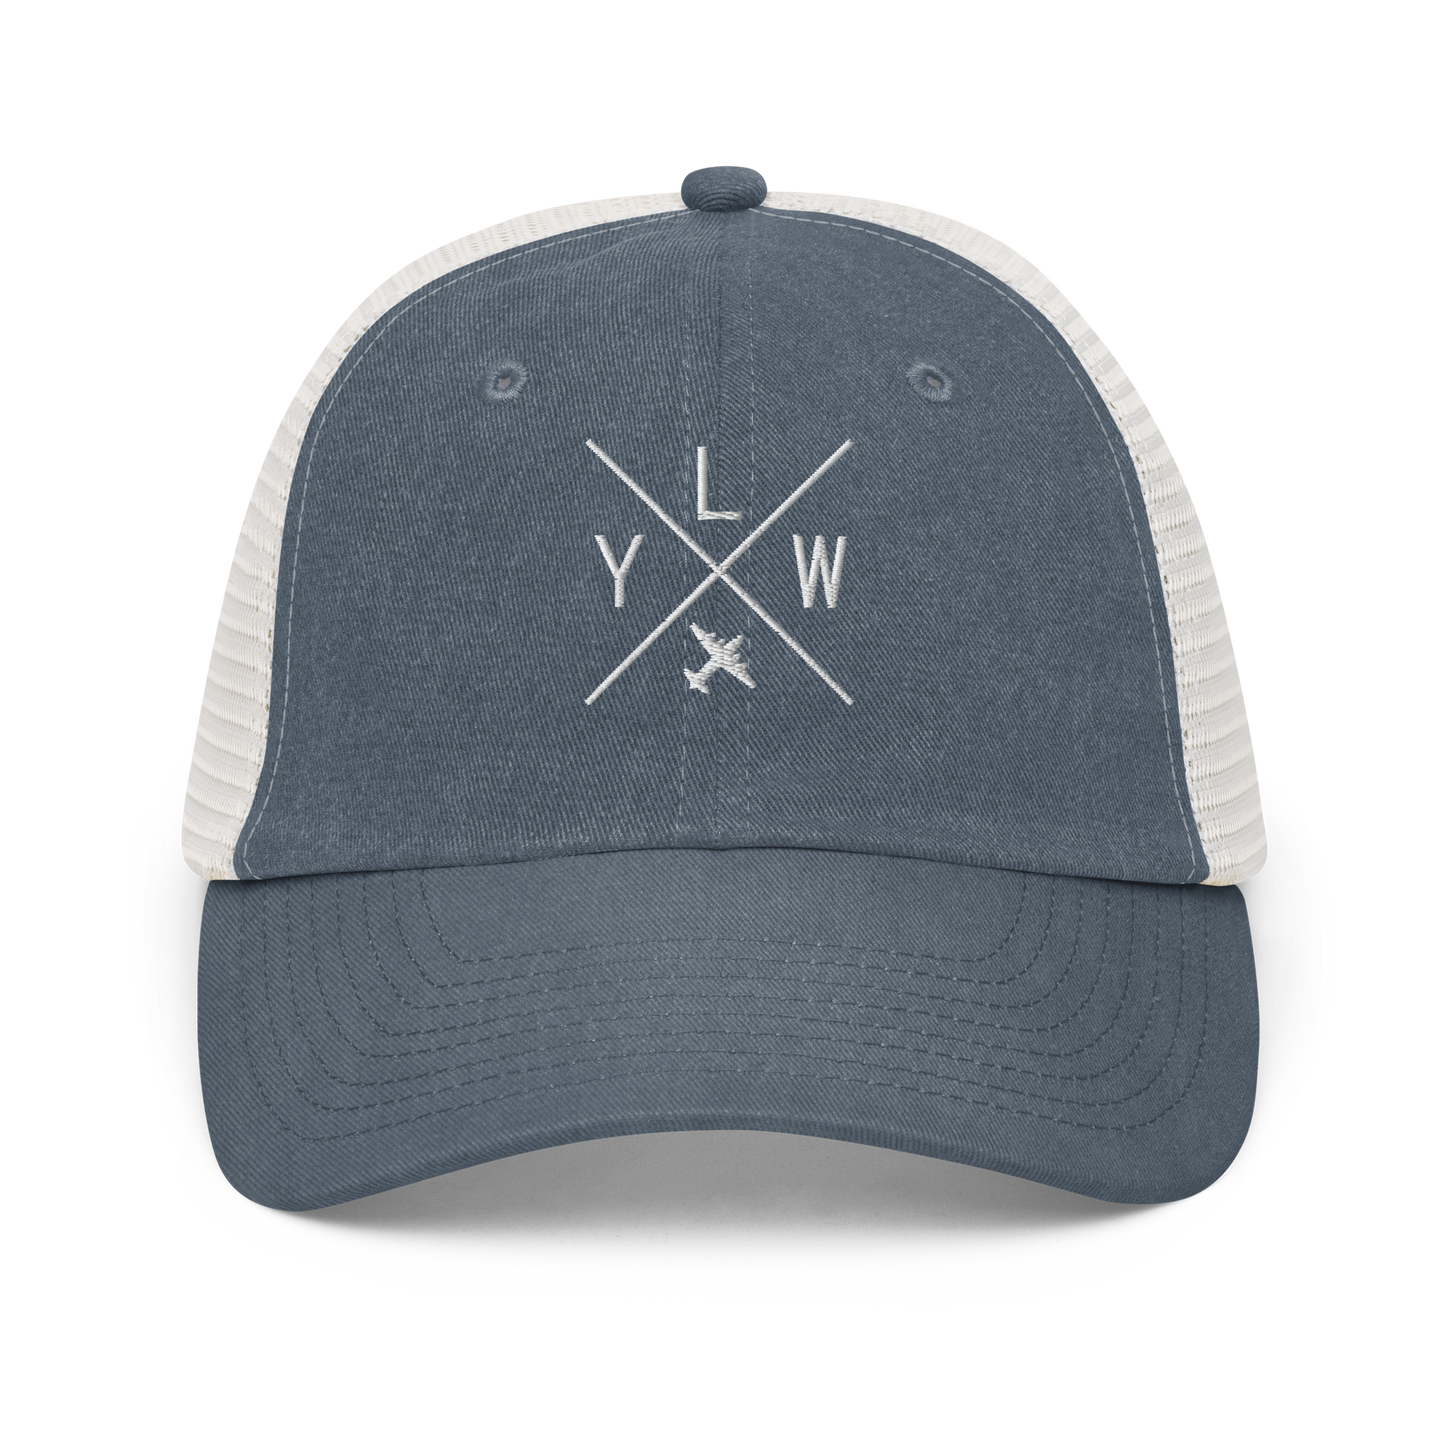 YHM Designs - YLW Kelowna Pigment-Dyed Trucker Cap - Crossed-X Design with Airport Code and Vintage Propliner - White Embroidery - Image 06